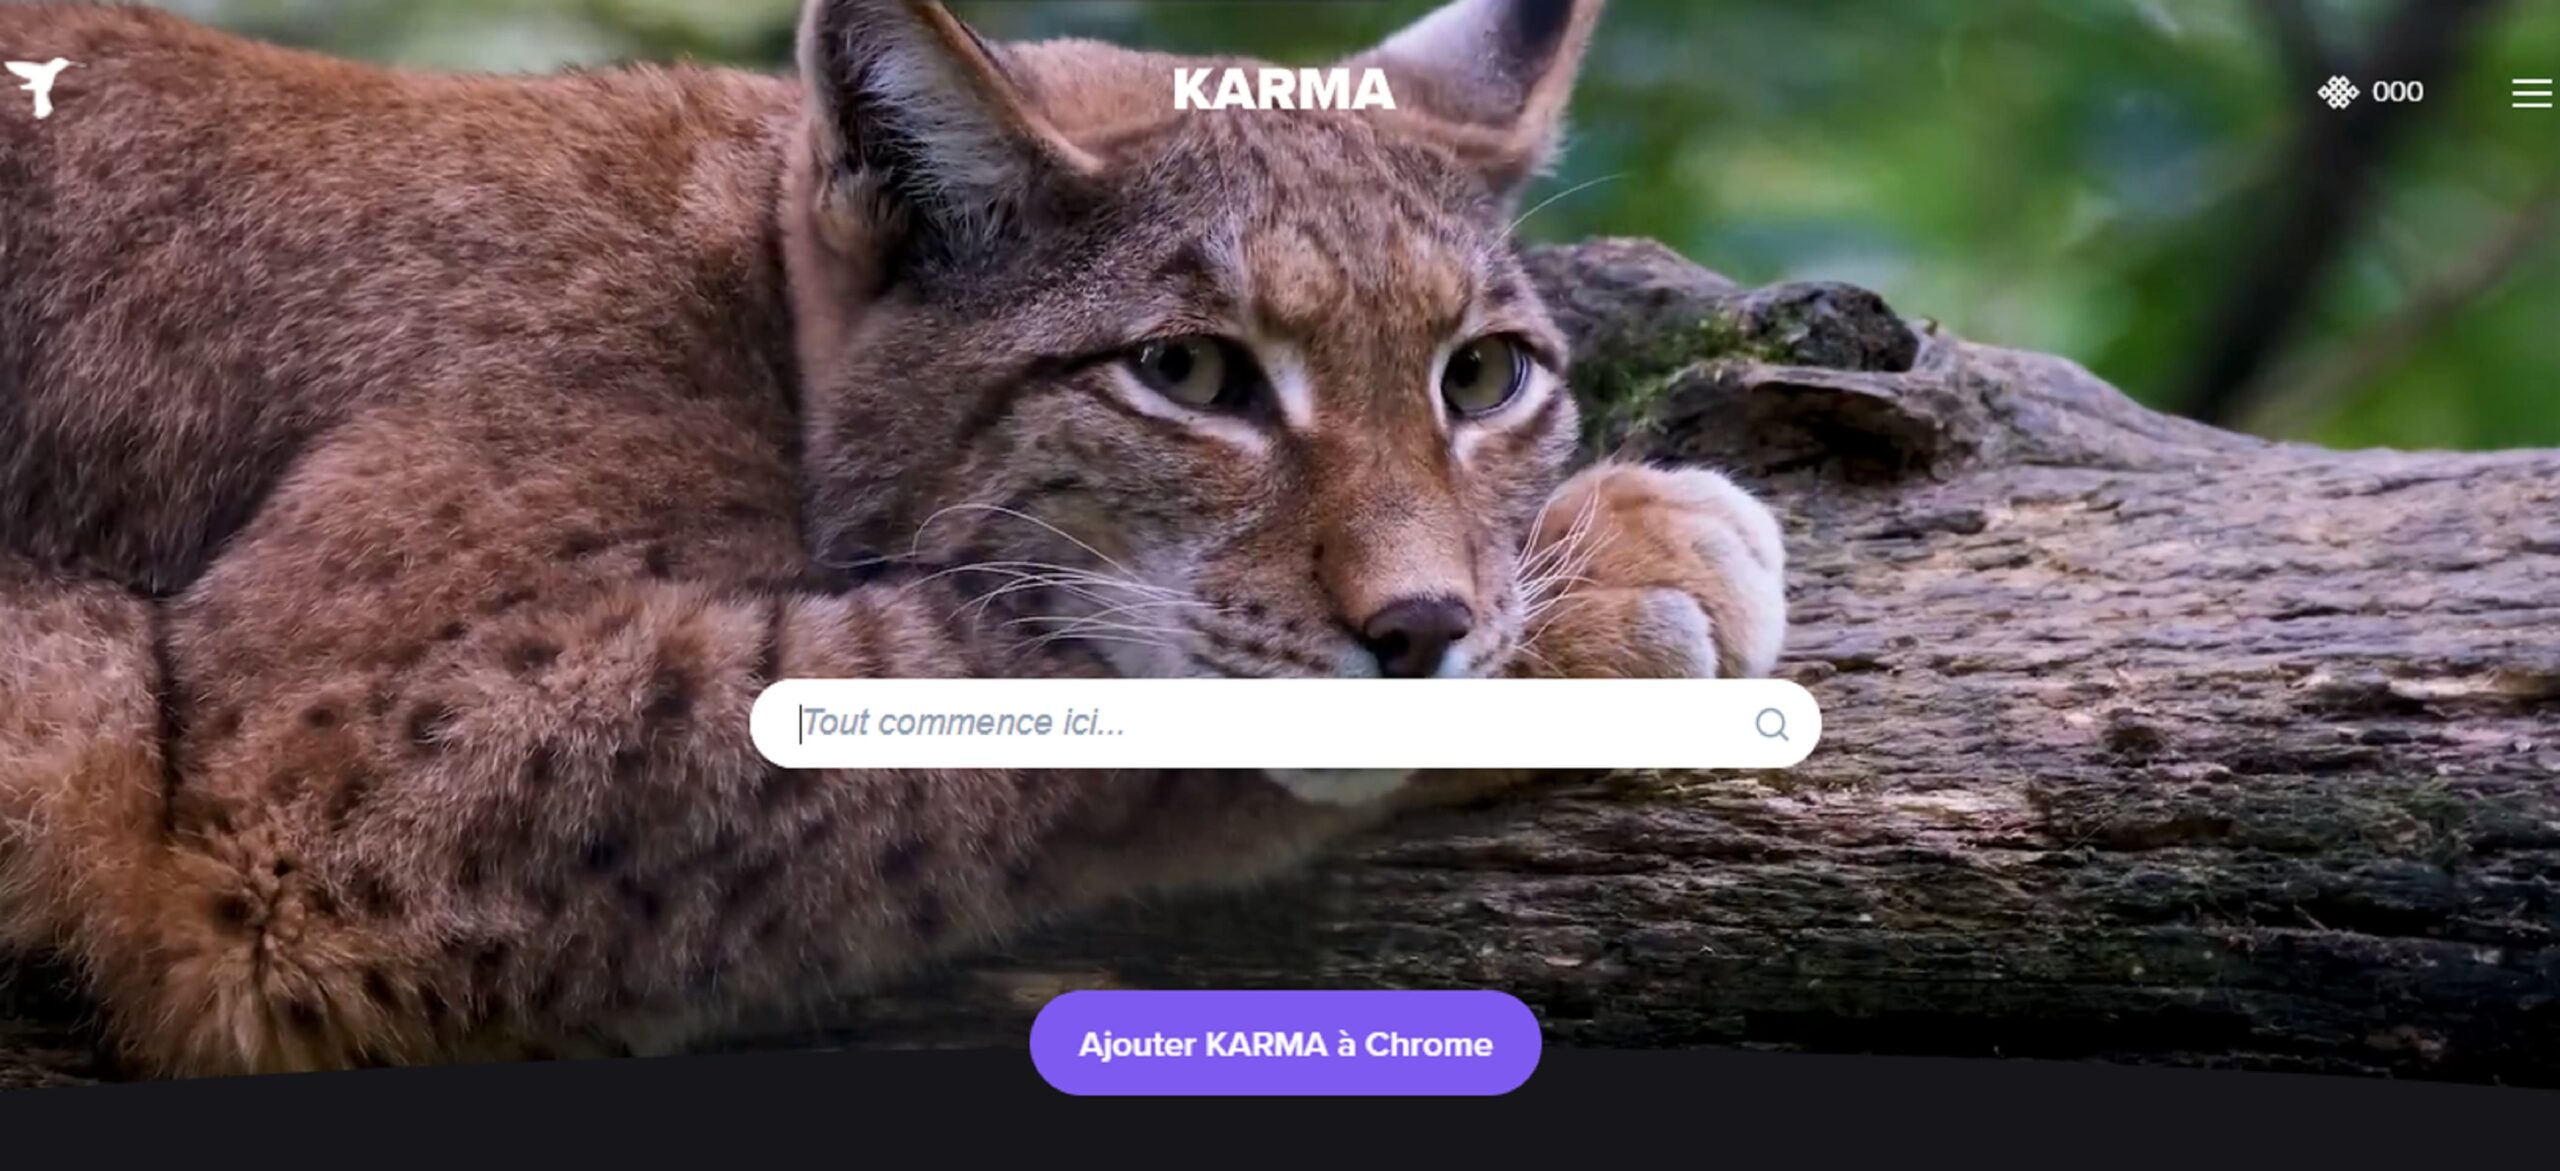 Karma, the new search engine that funds biodiversity conservation